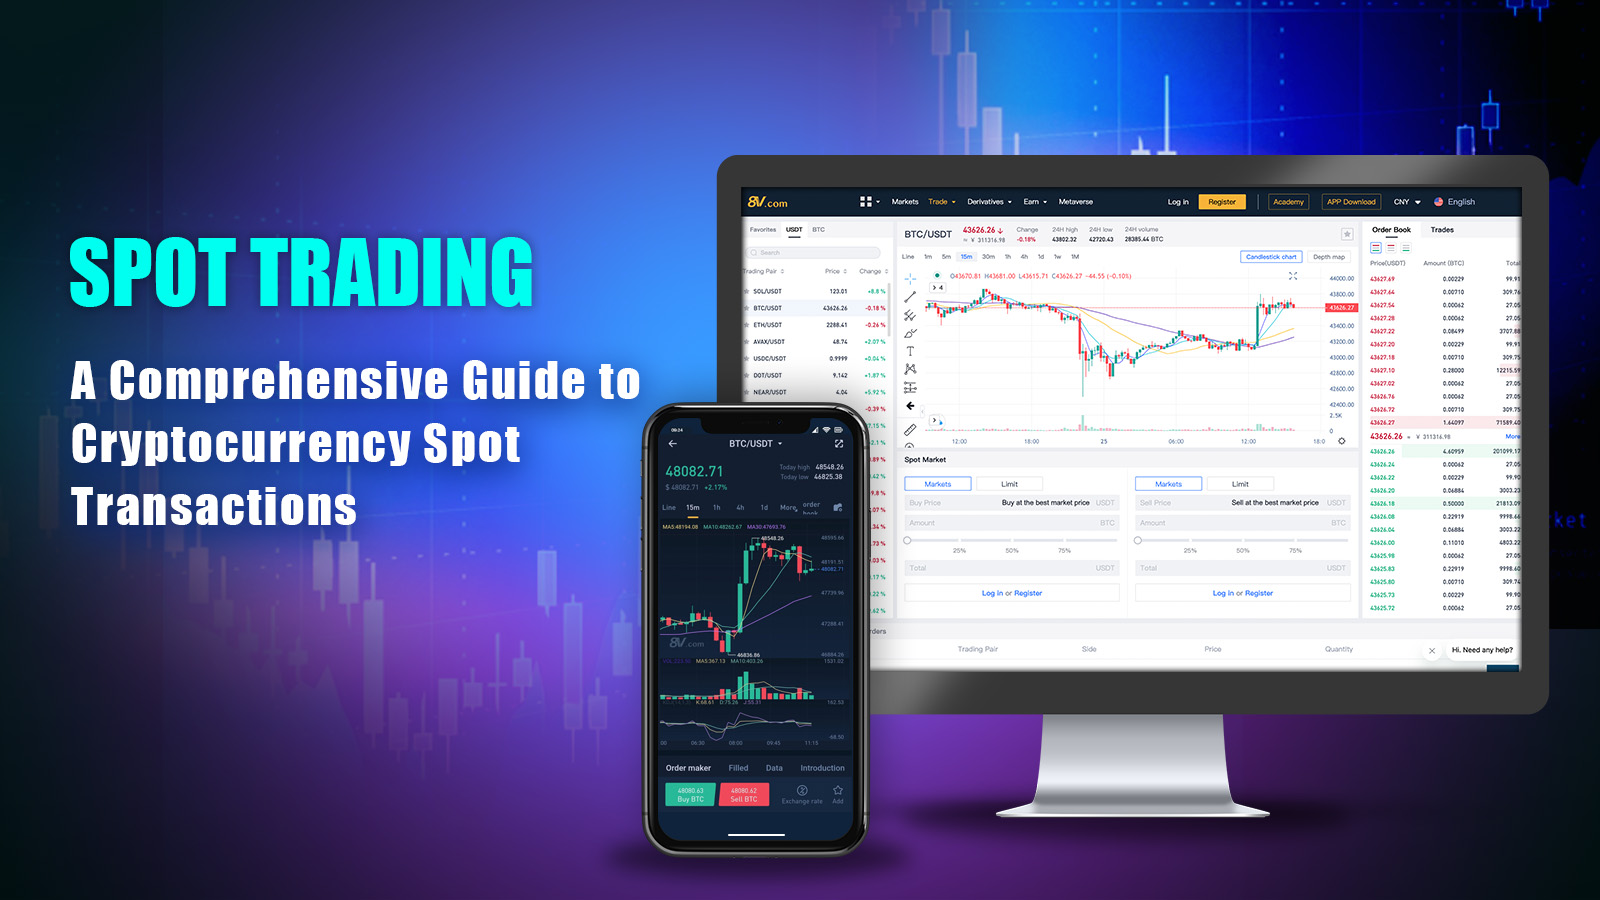 Spot Trading: A Comprehensive Guide to Cryptocurrency Spot Transactions